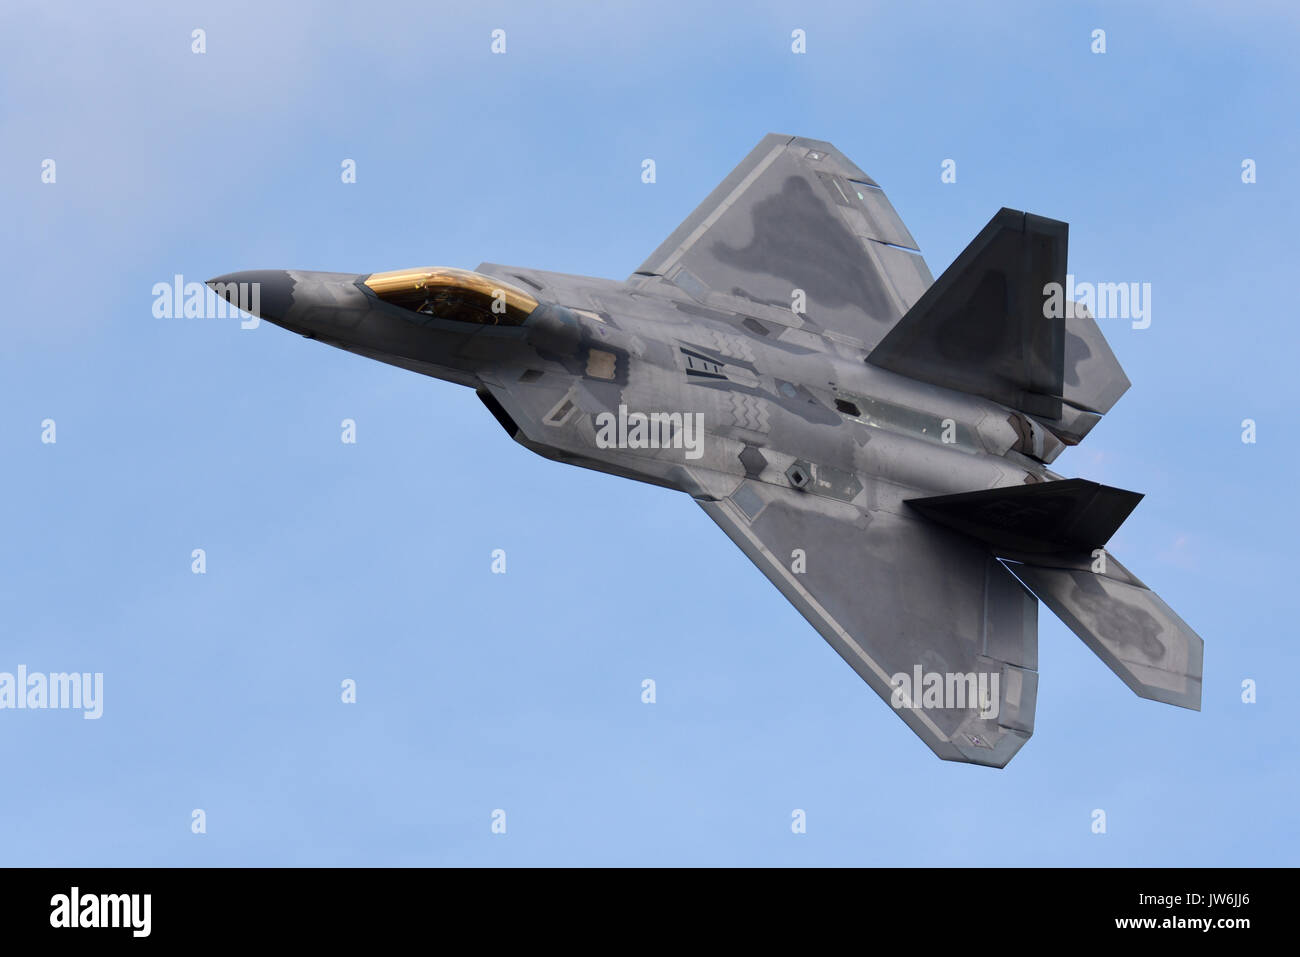 Lockheed Martin F-22 Raptor stealth fighter jet plane flying at an airshow. US Air Force. Space for copy Stock Photo